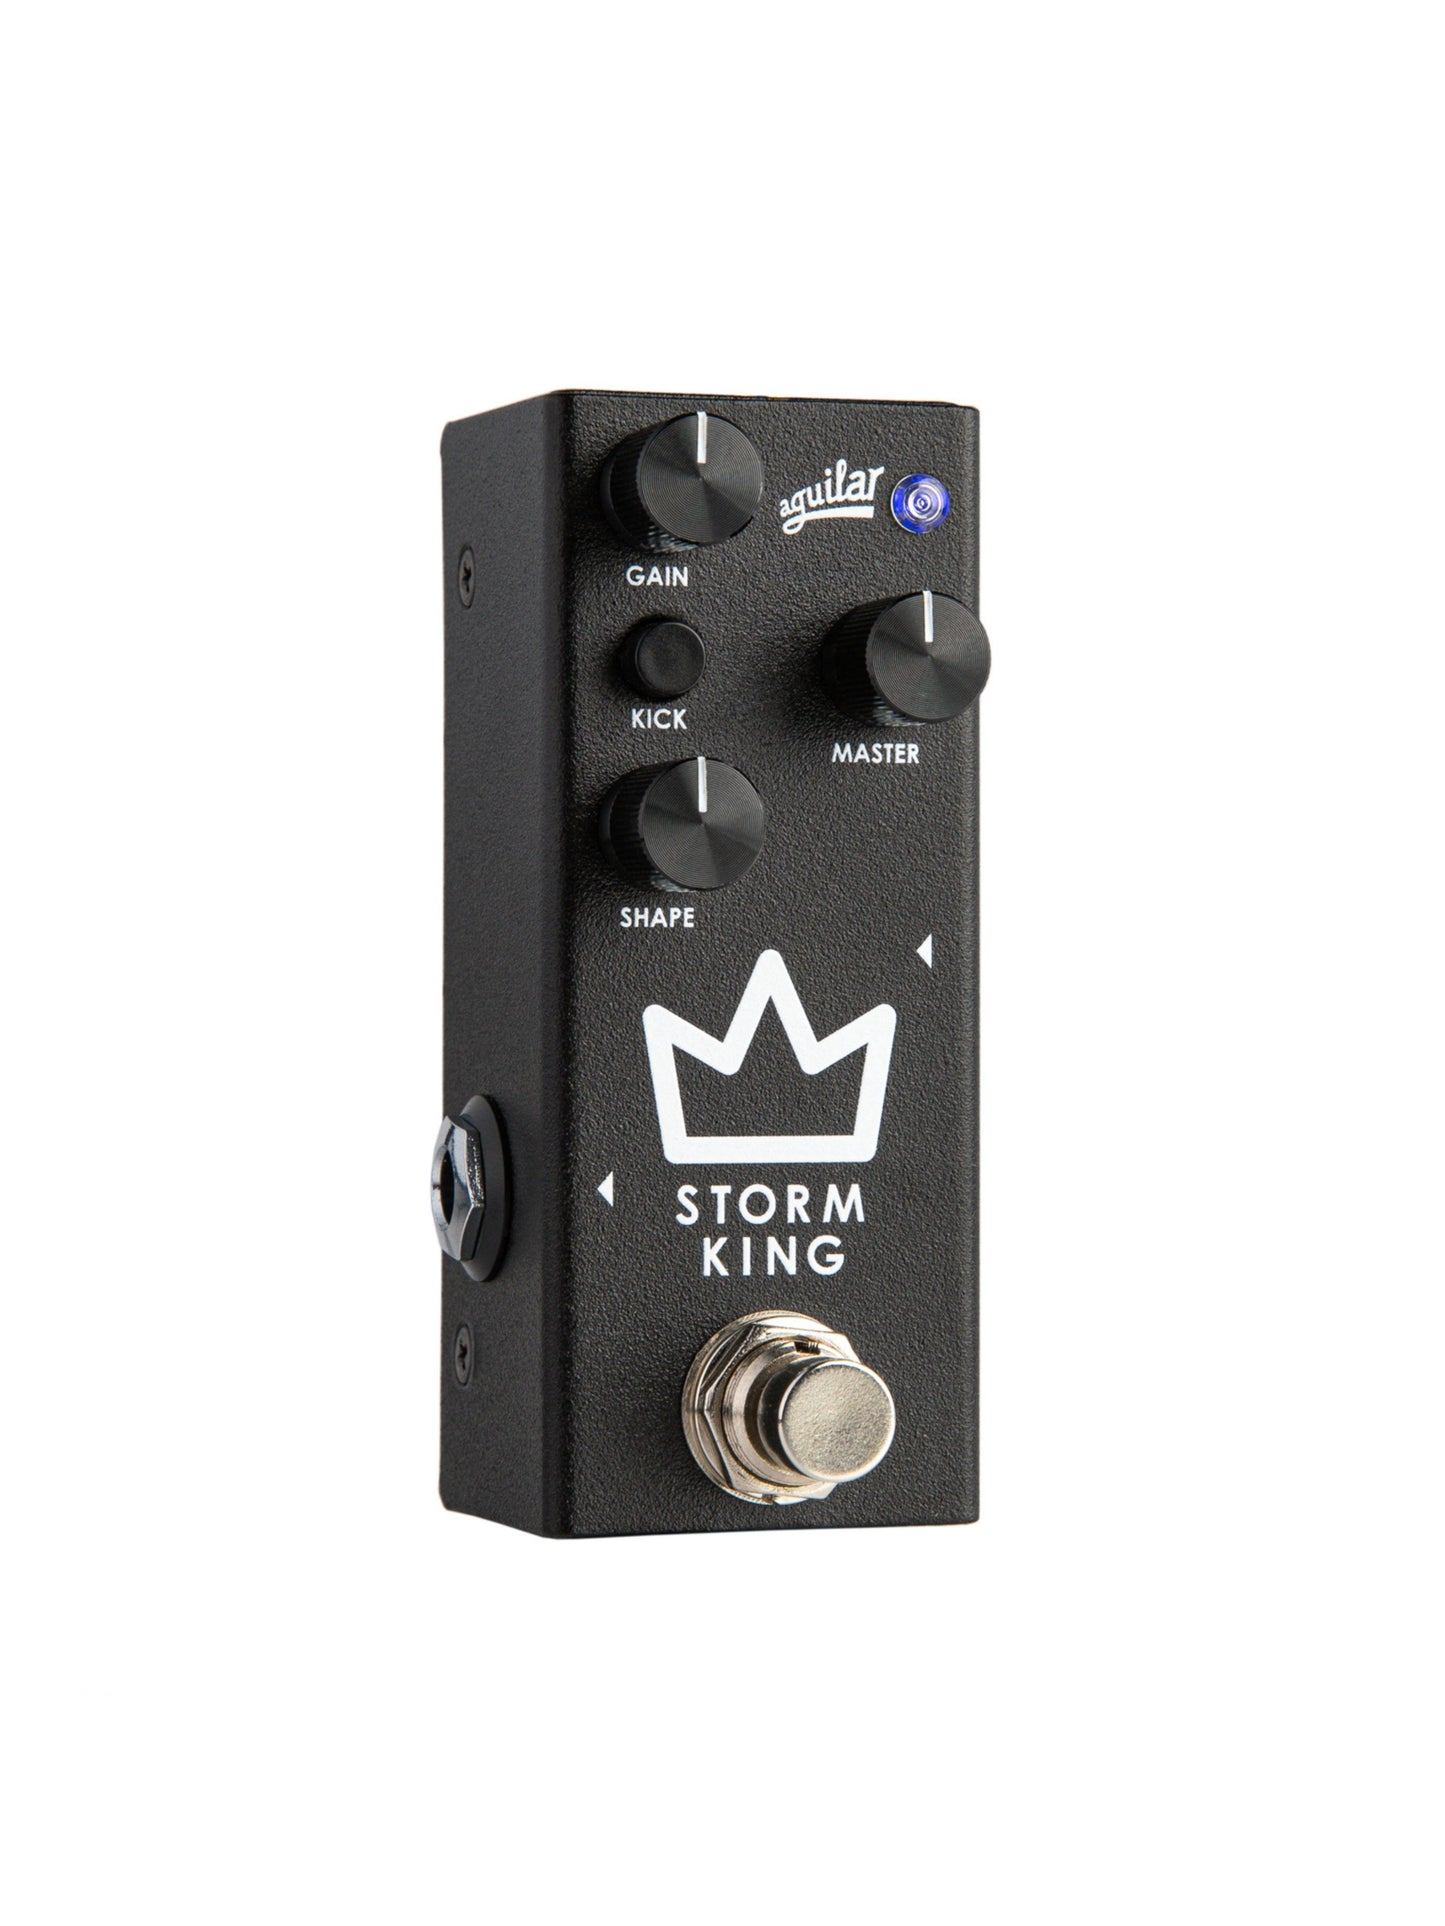 Aguilar STORM KING Distortion / Fuzz Pedal